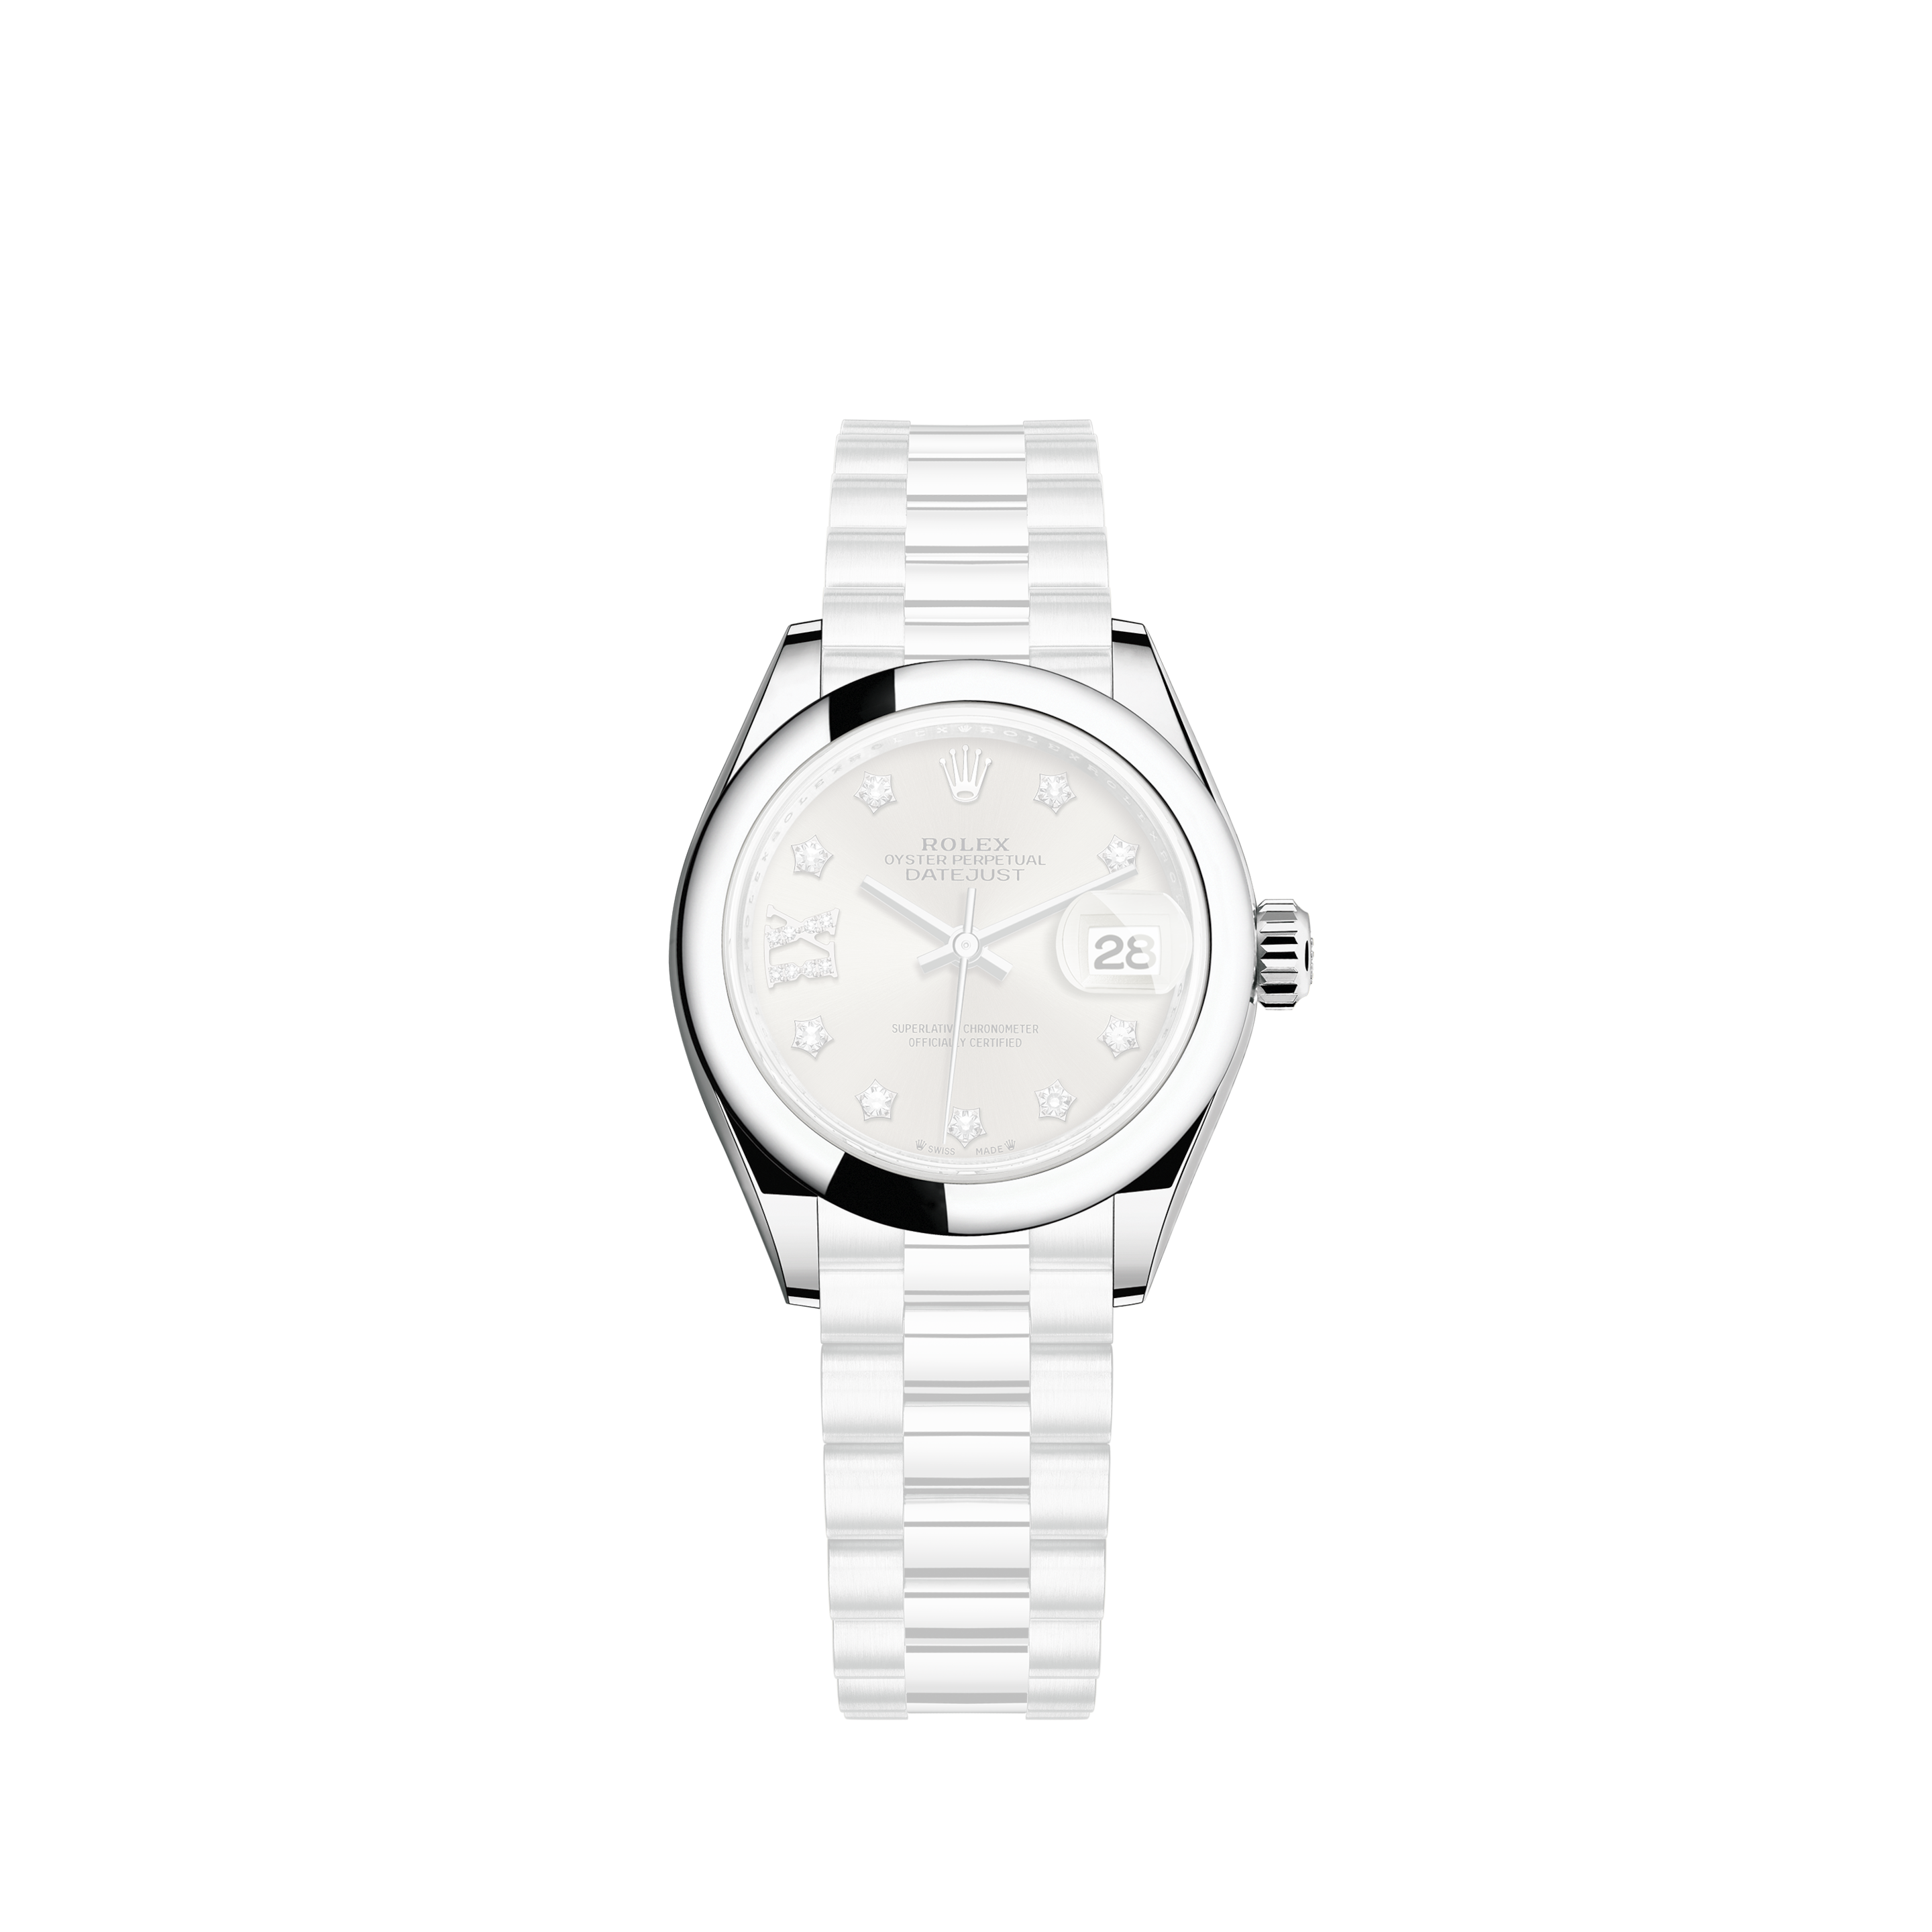 Rolex Steel and Everose Gold Rolesor Datejust 36